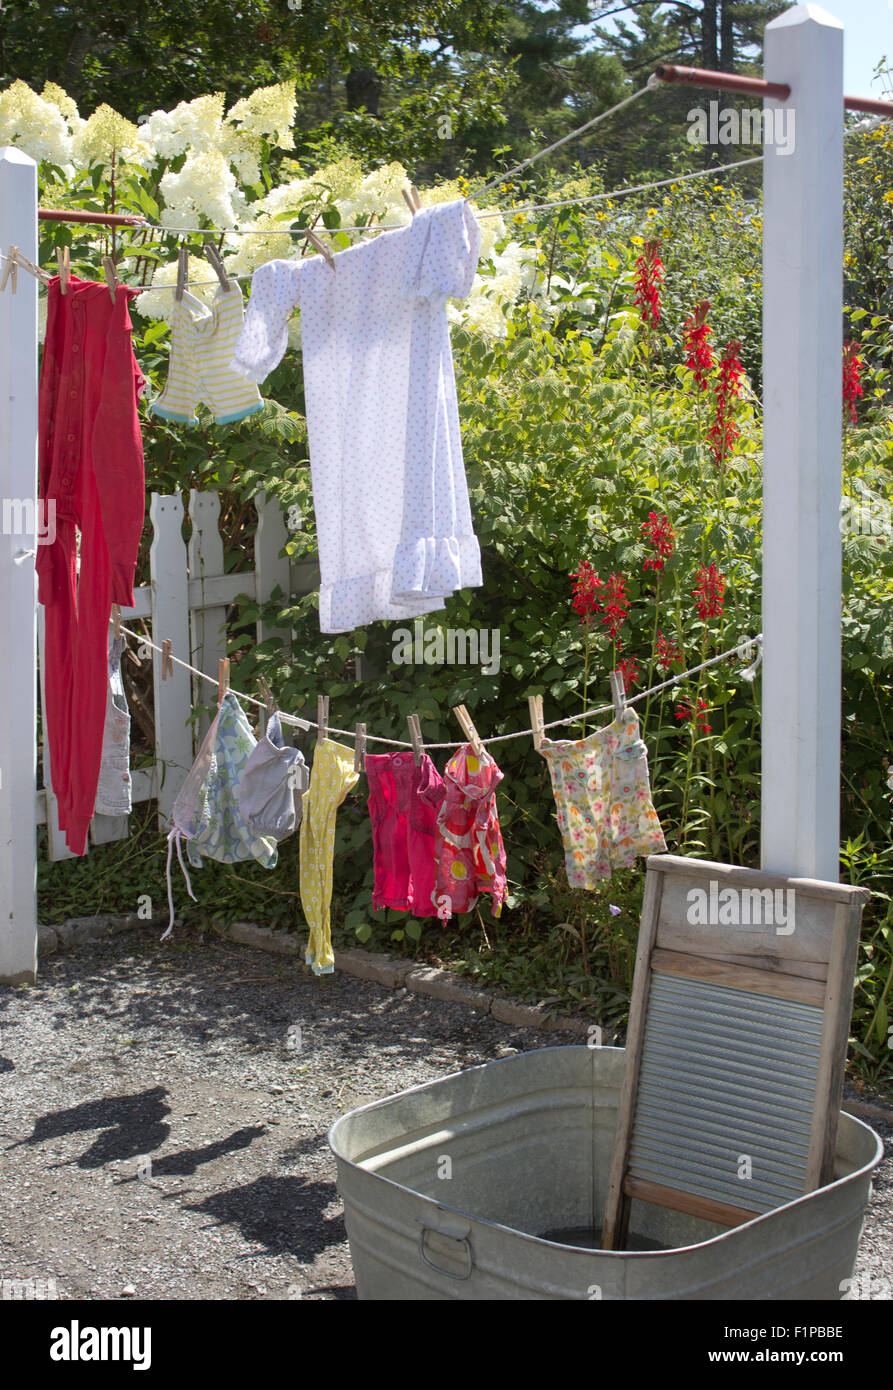 Children's clothing drying on a clothesline. Stock Photo